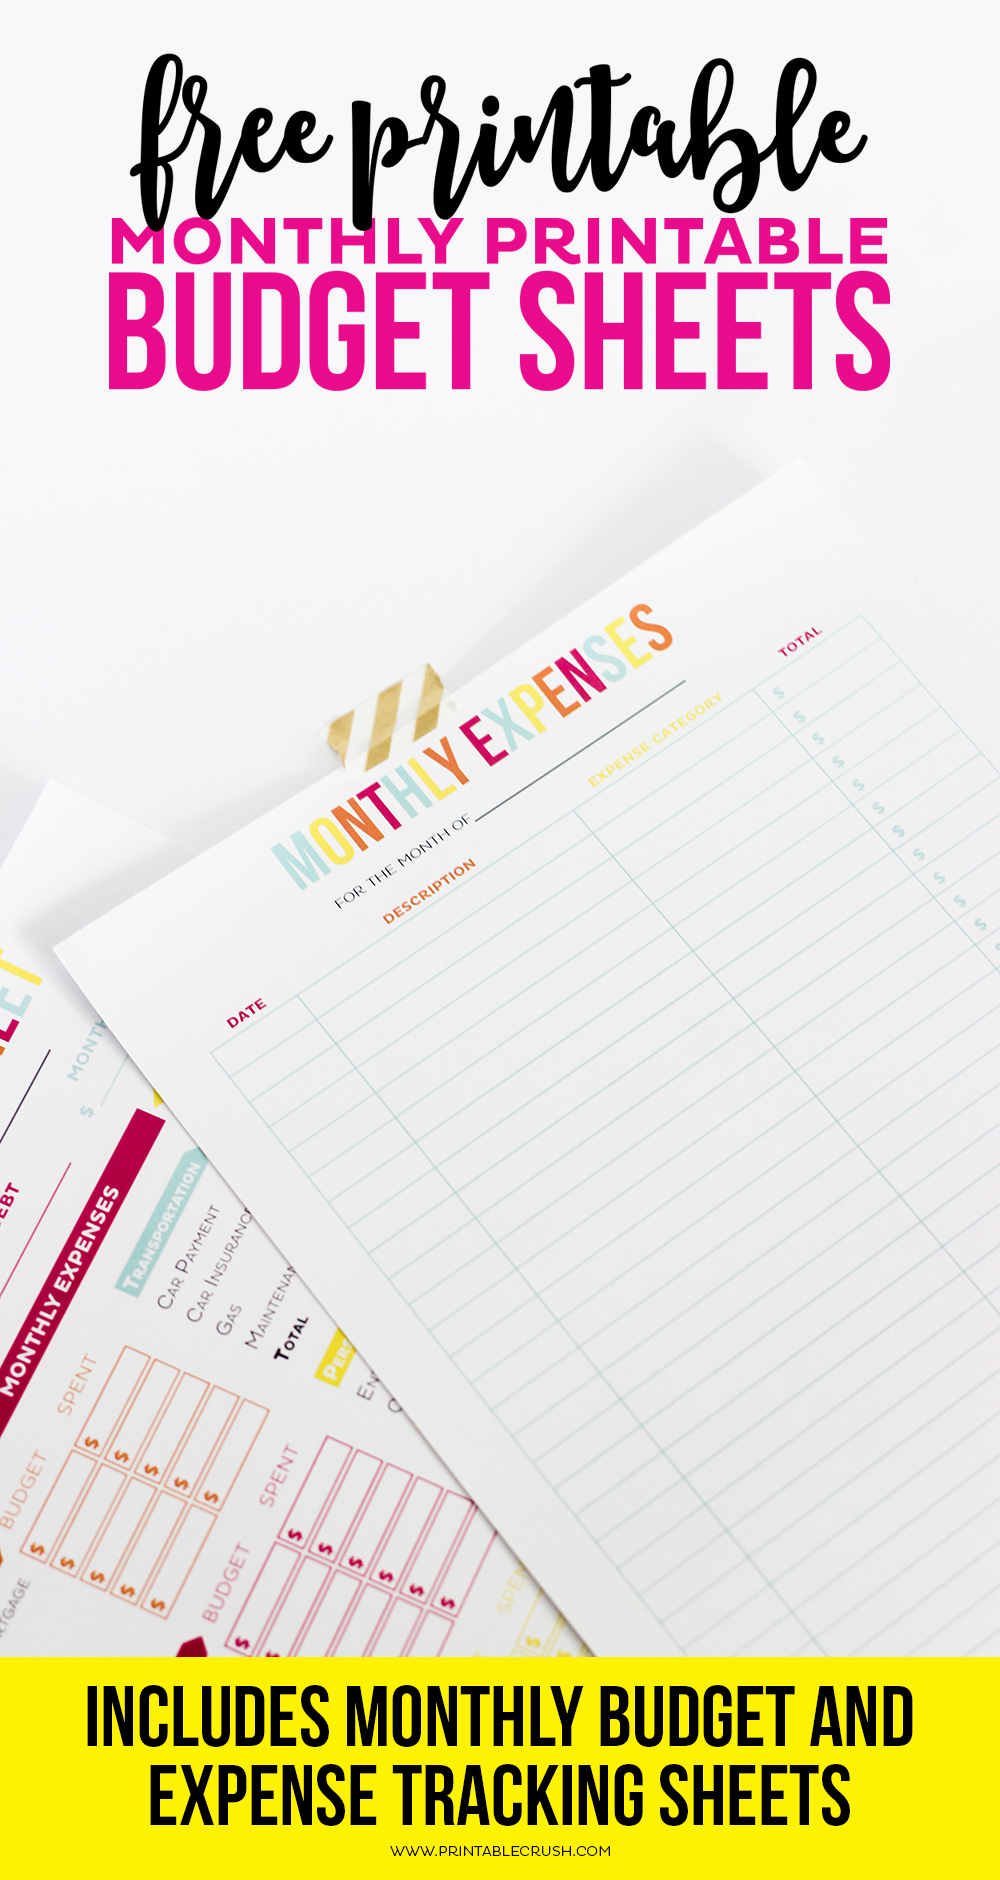 Monthly-Printable-Budget-Sheets-12-copy.jpg